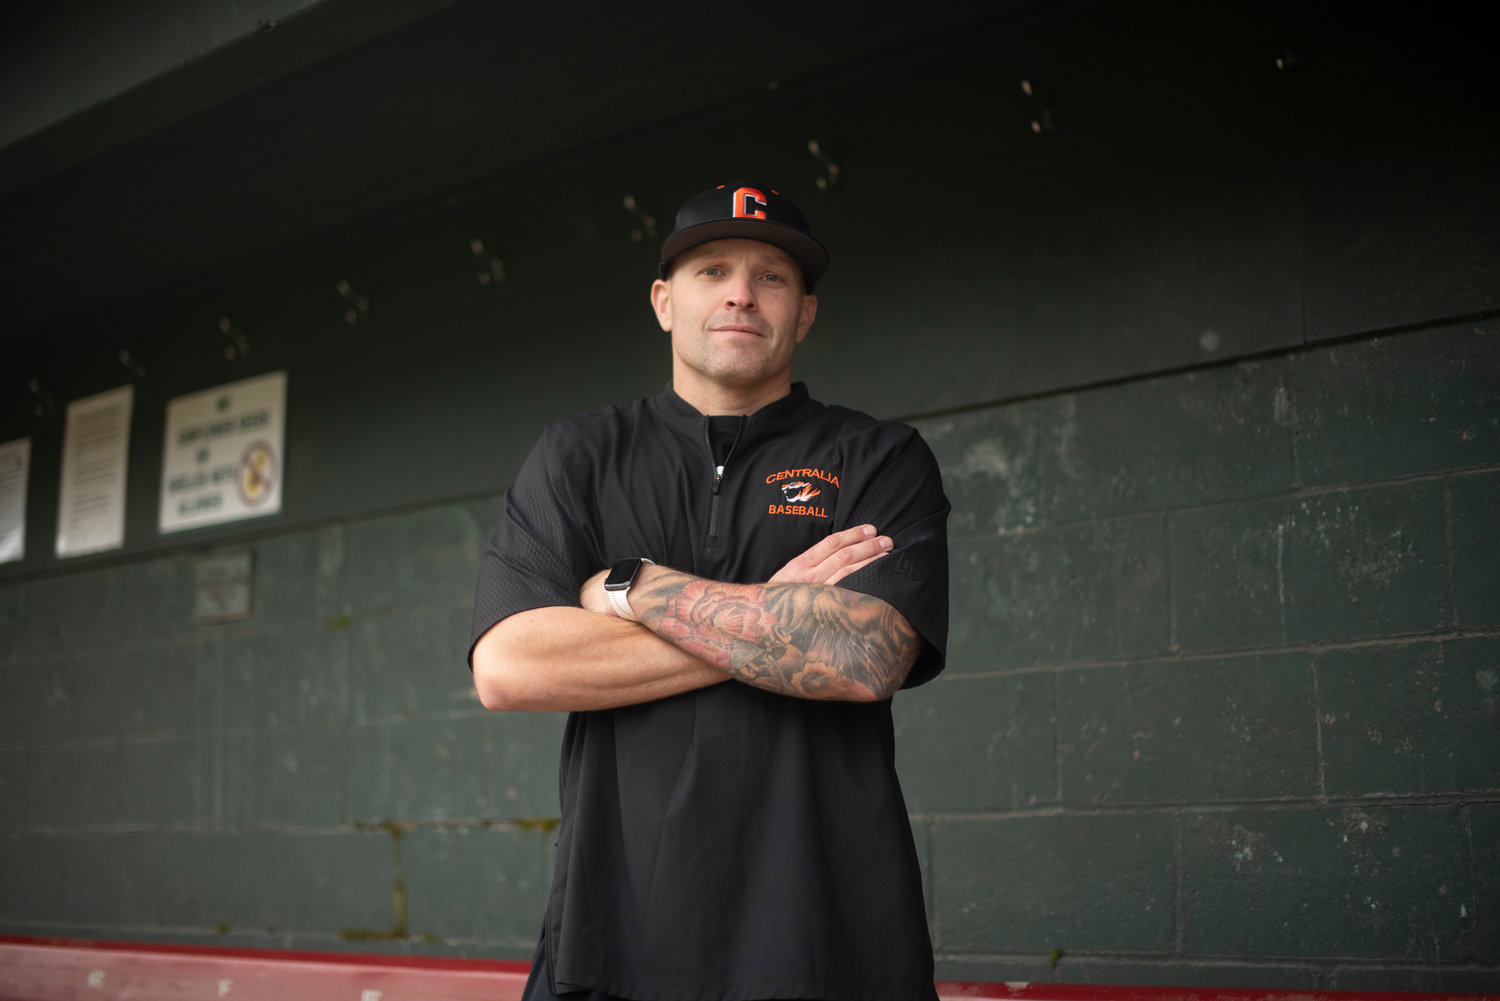 Adam Riffe was hired as head coach of Centralia baseball on Nov. 17 after eight years as an assistant coach for the Tigers.